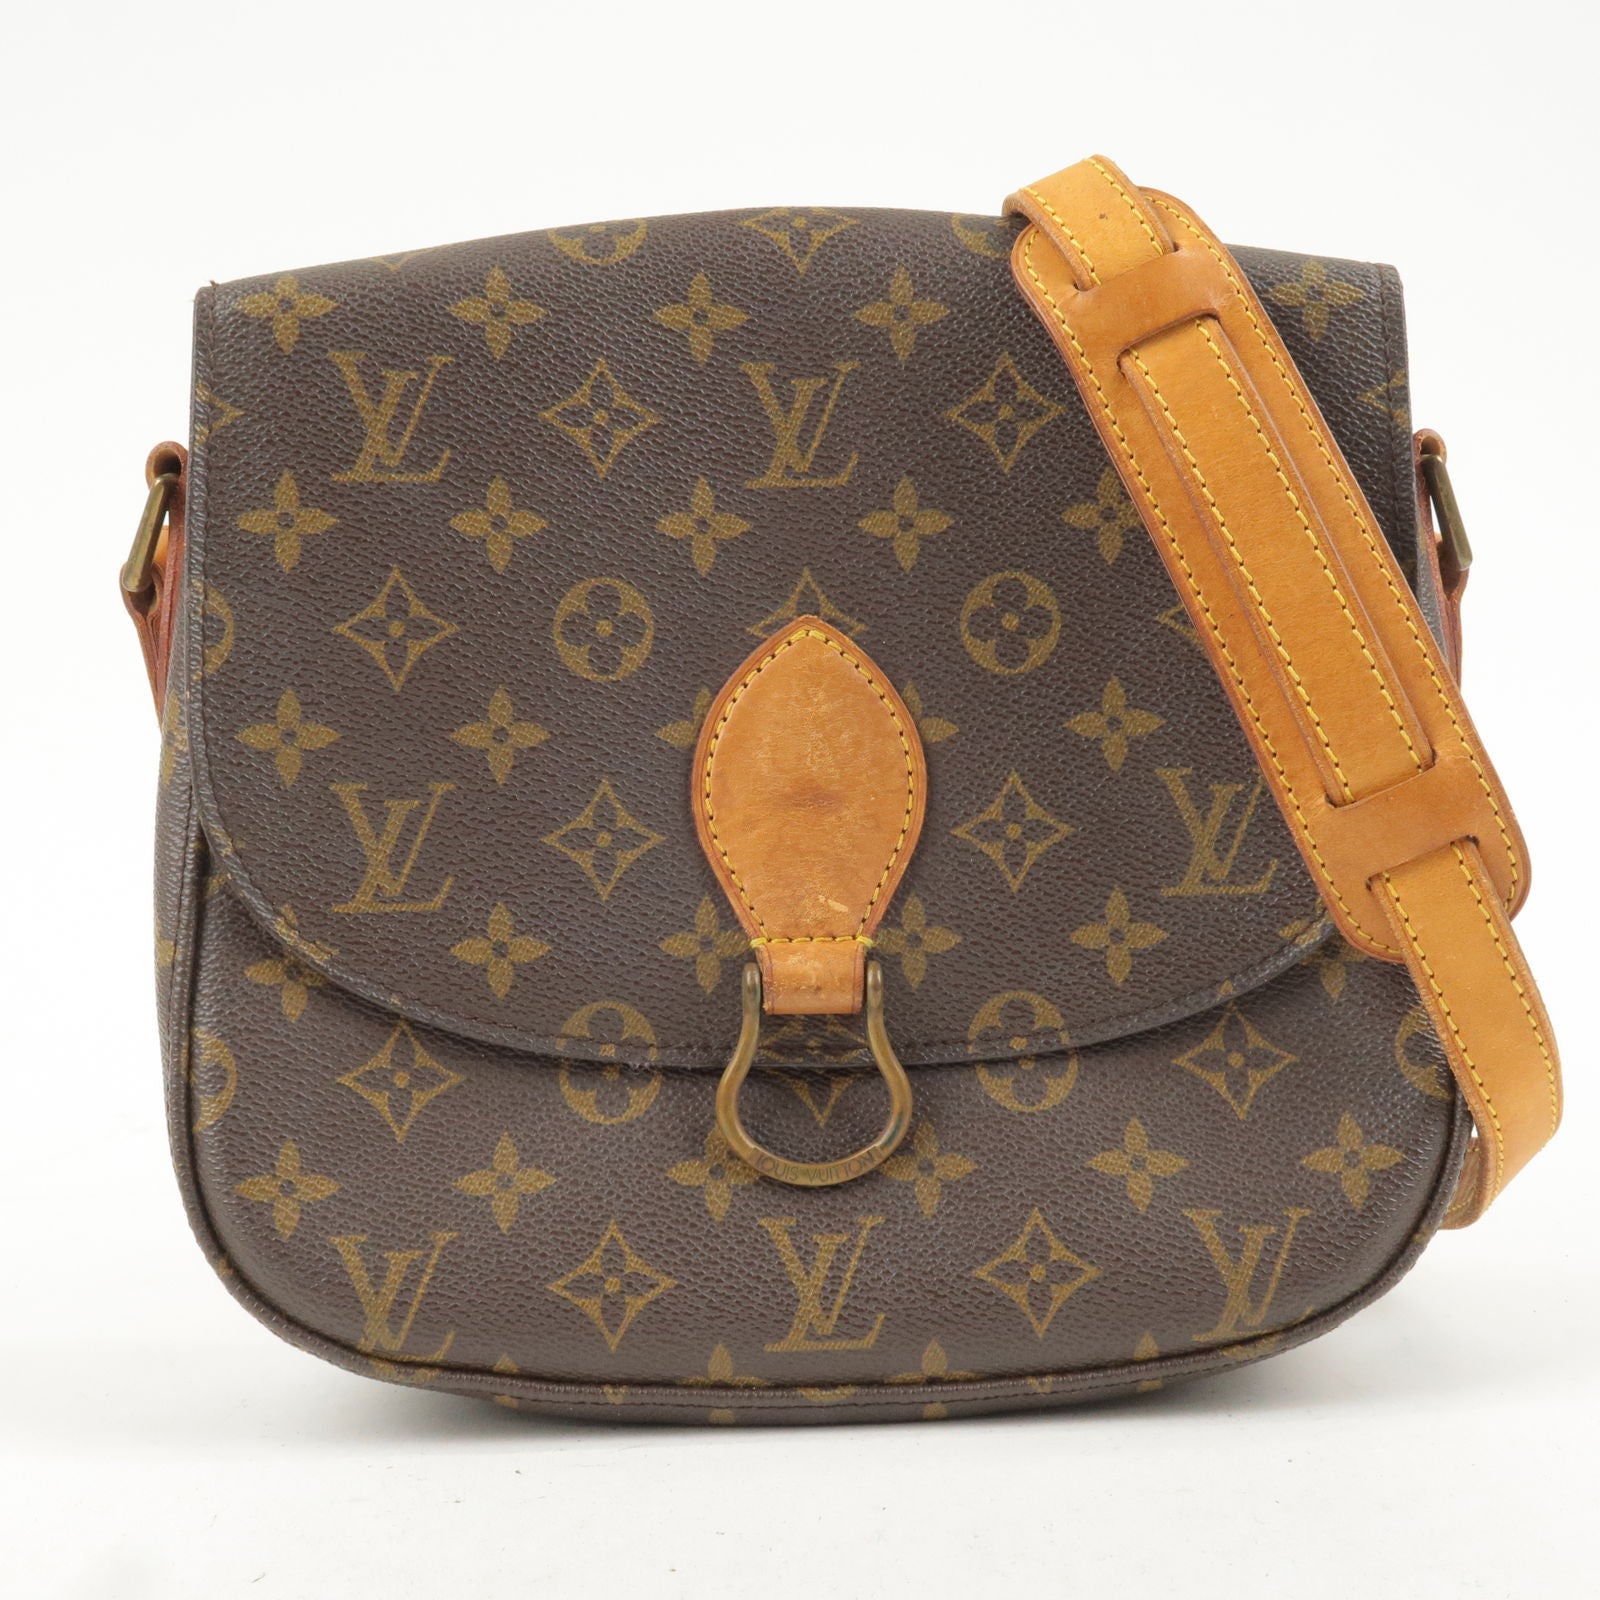 Shop for Louis Vuitton Monogram Canvas Leather Musette Salsa GM Bag -  Shipped from USA